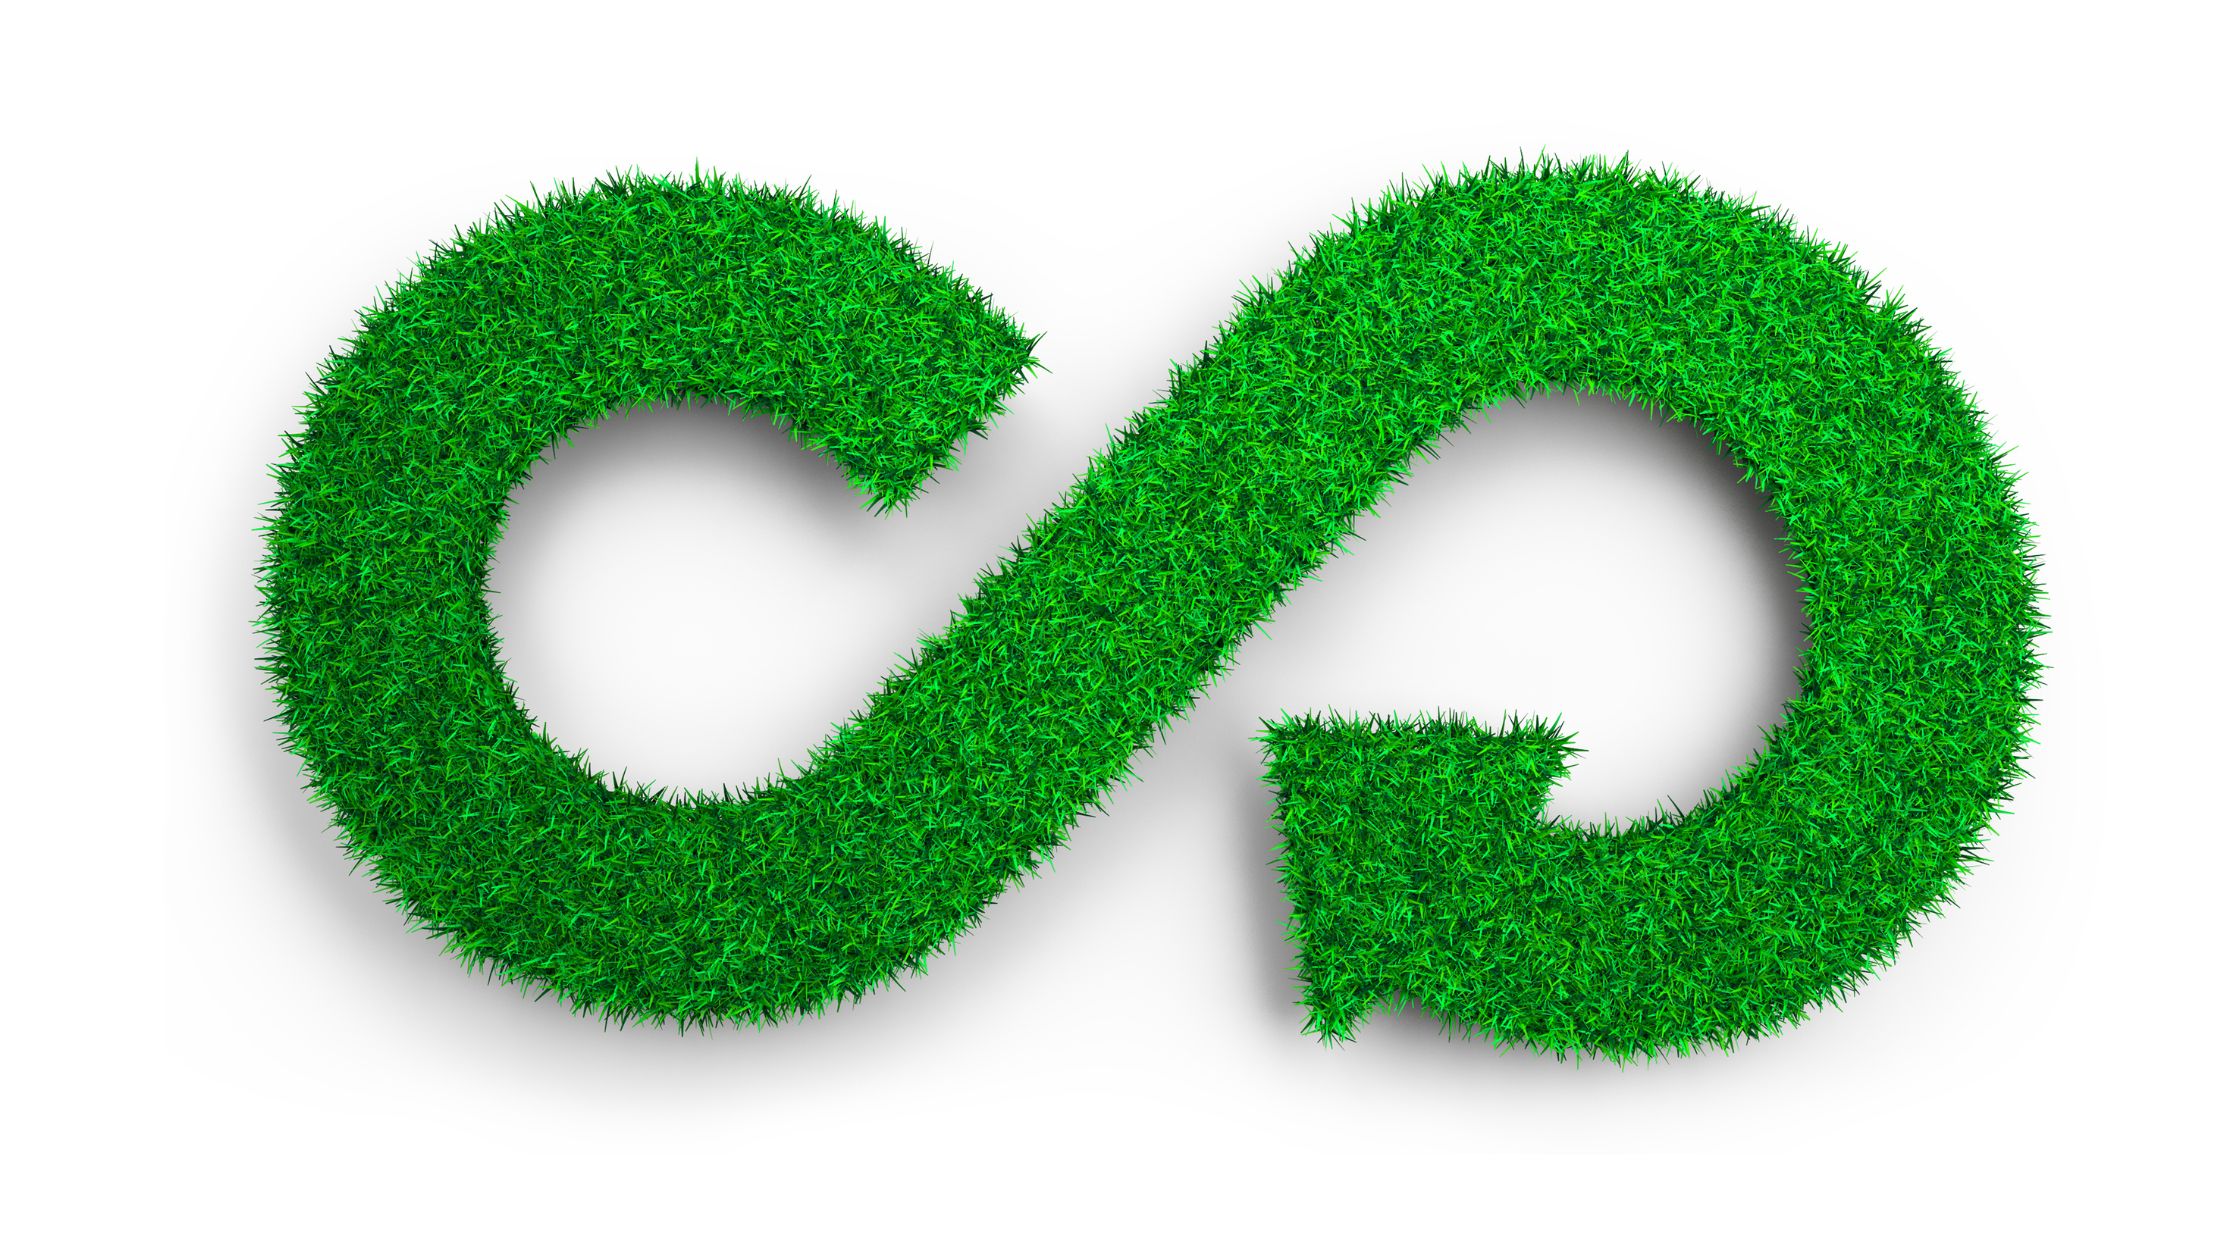 infinity symbol made up of grass